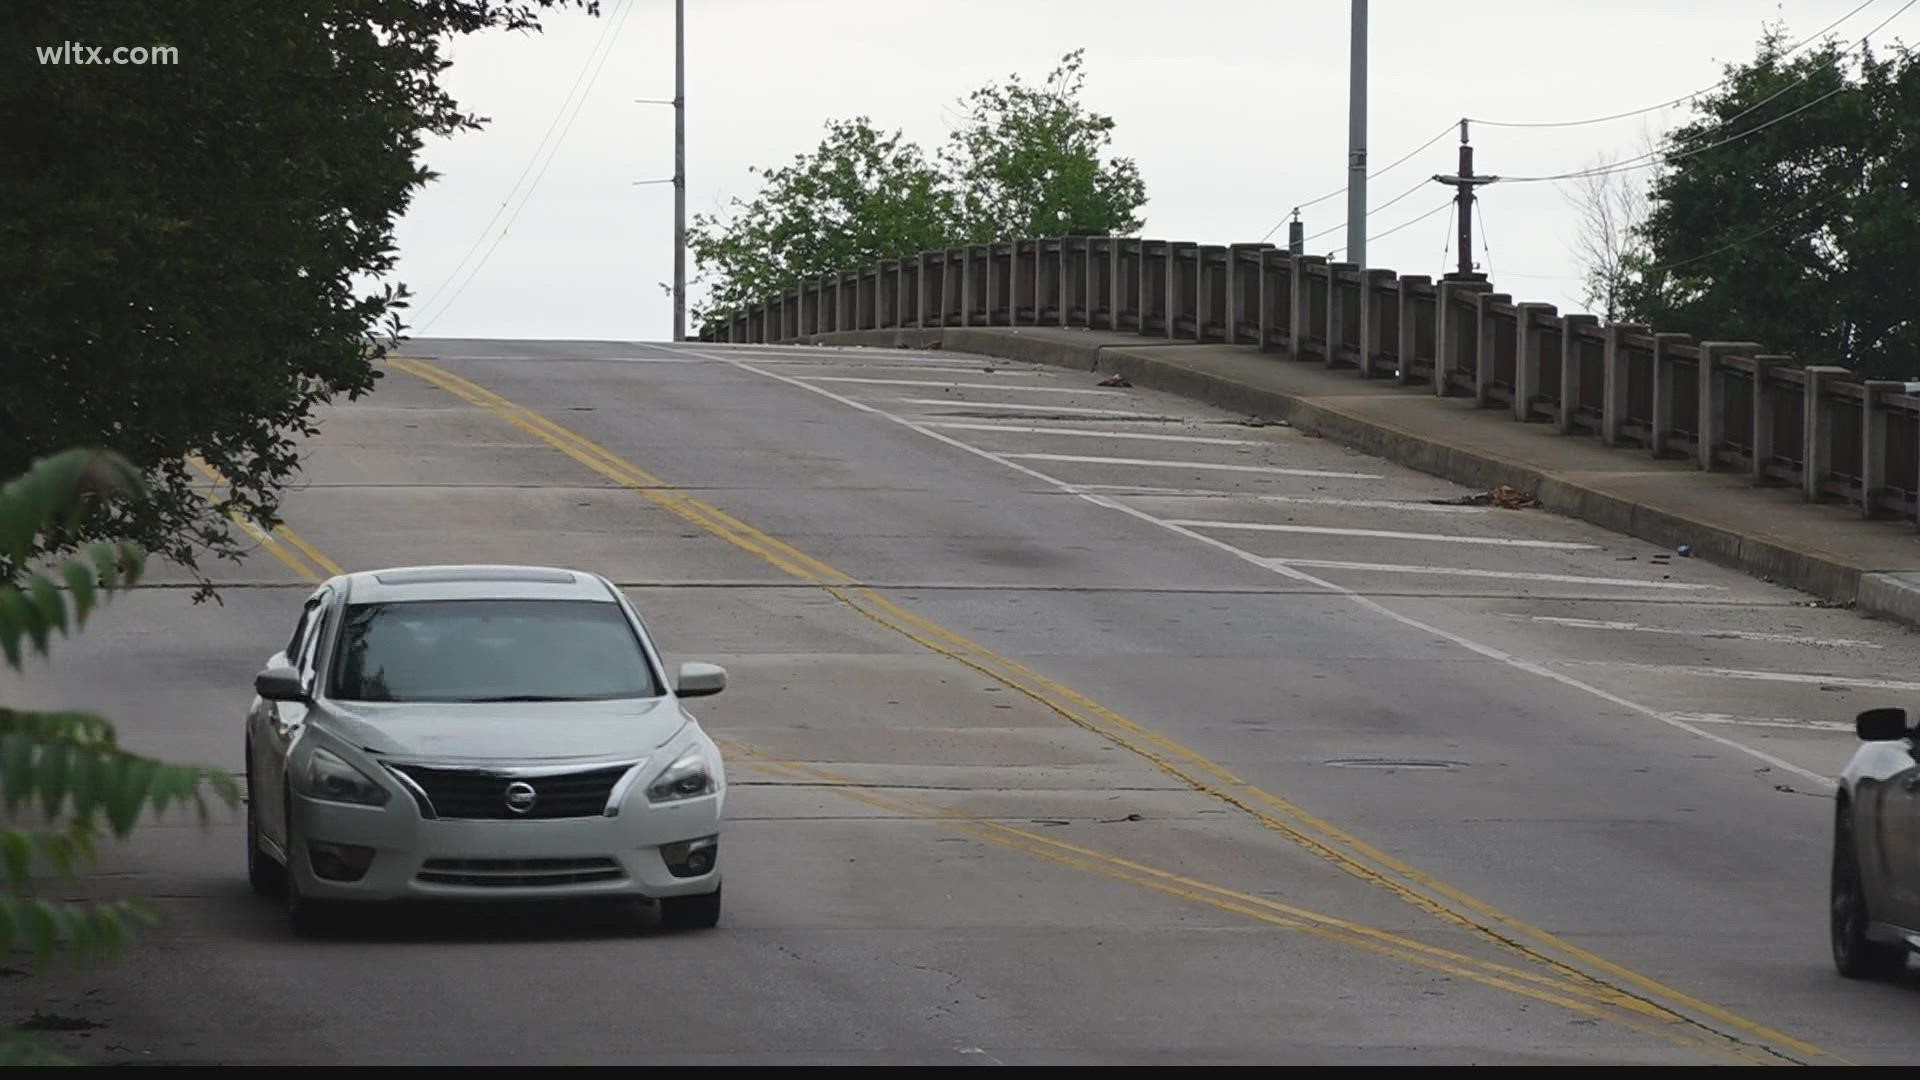 Sumter residents were able to express their concerns and get answers about the replacement of the Manning Avenue bridge at a meeting on Thursday.